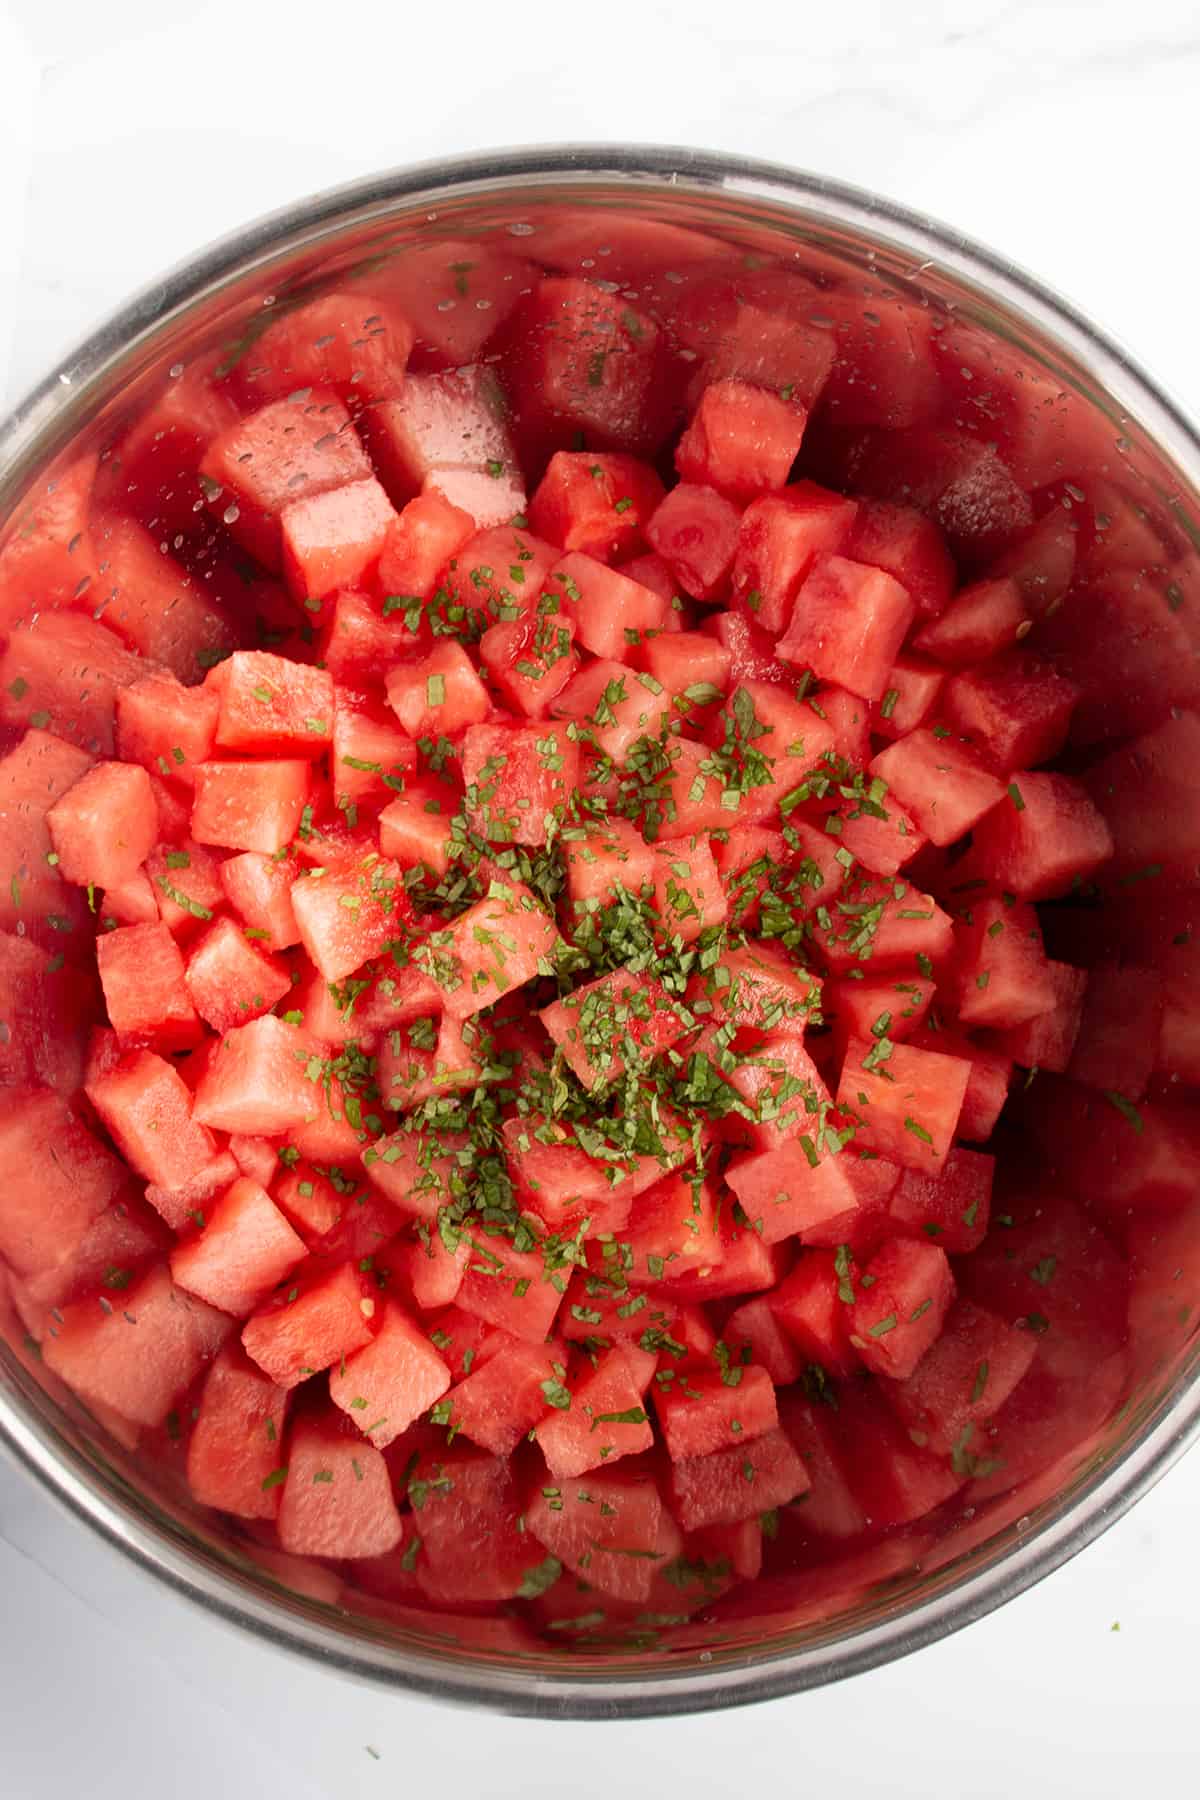 Large metal bowl with diced watermelon and freshly cut mint.